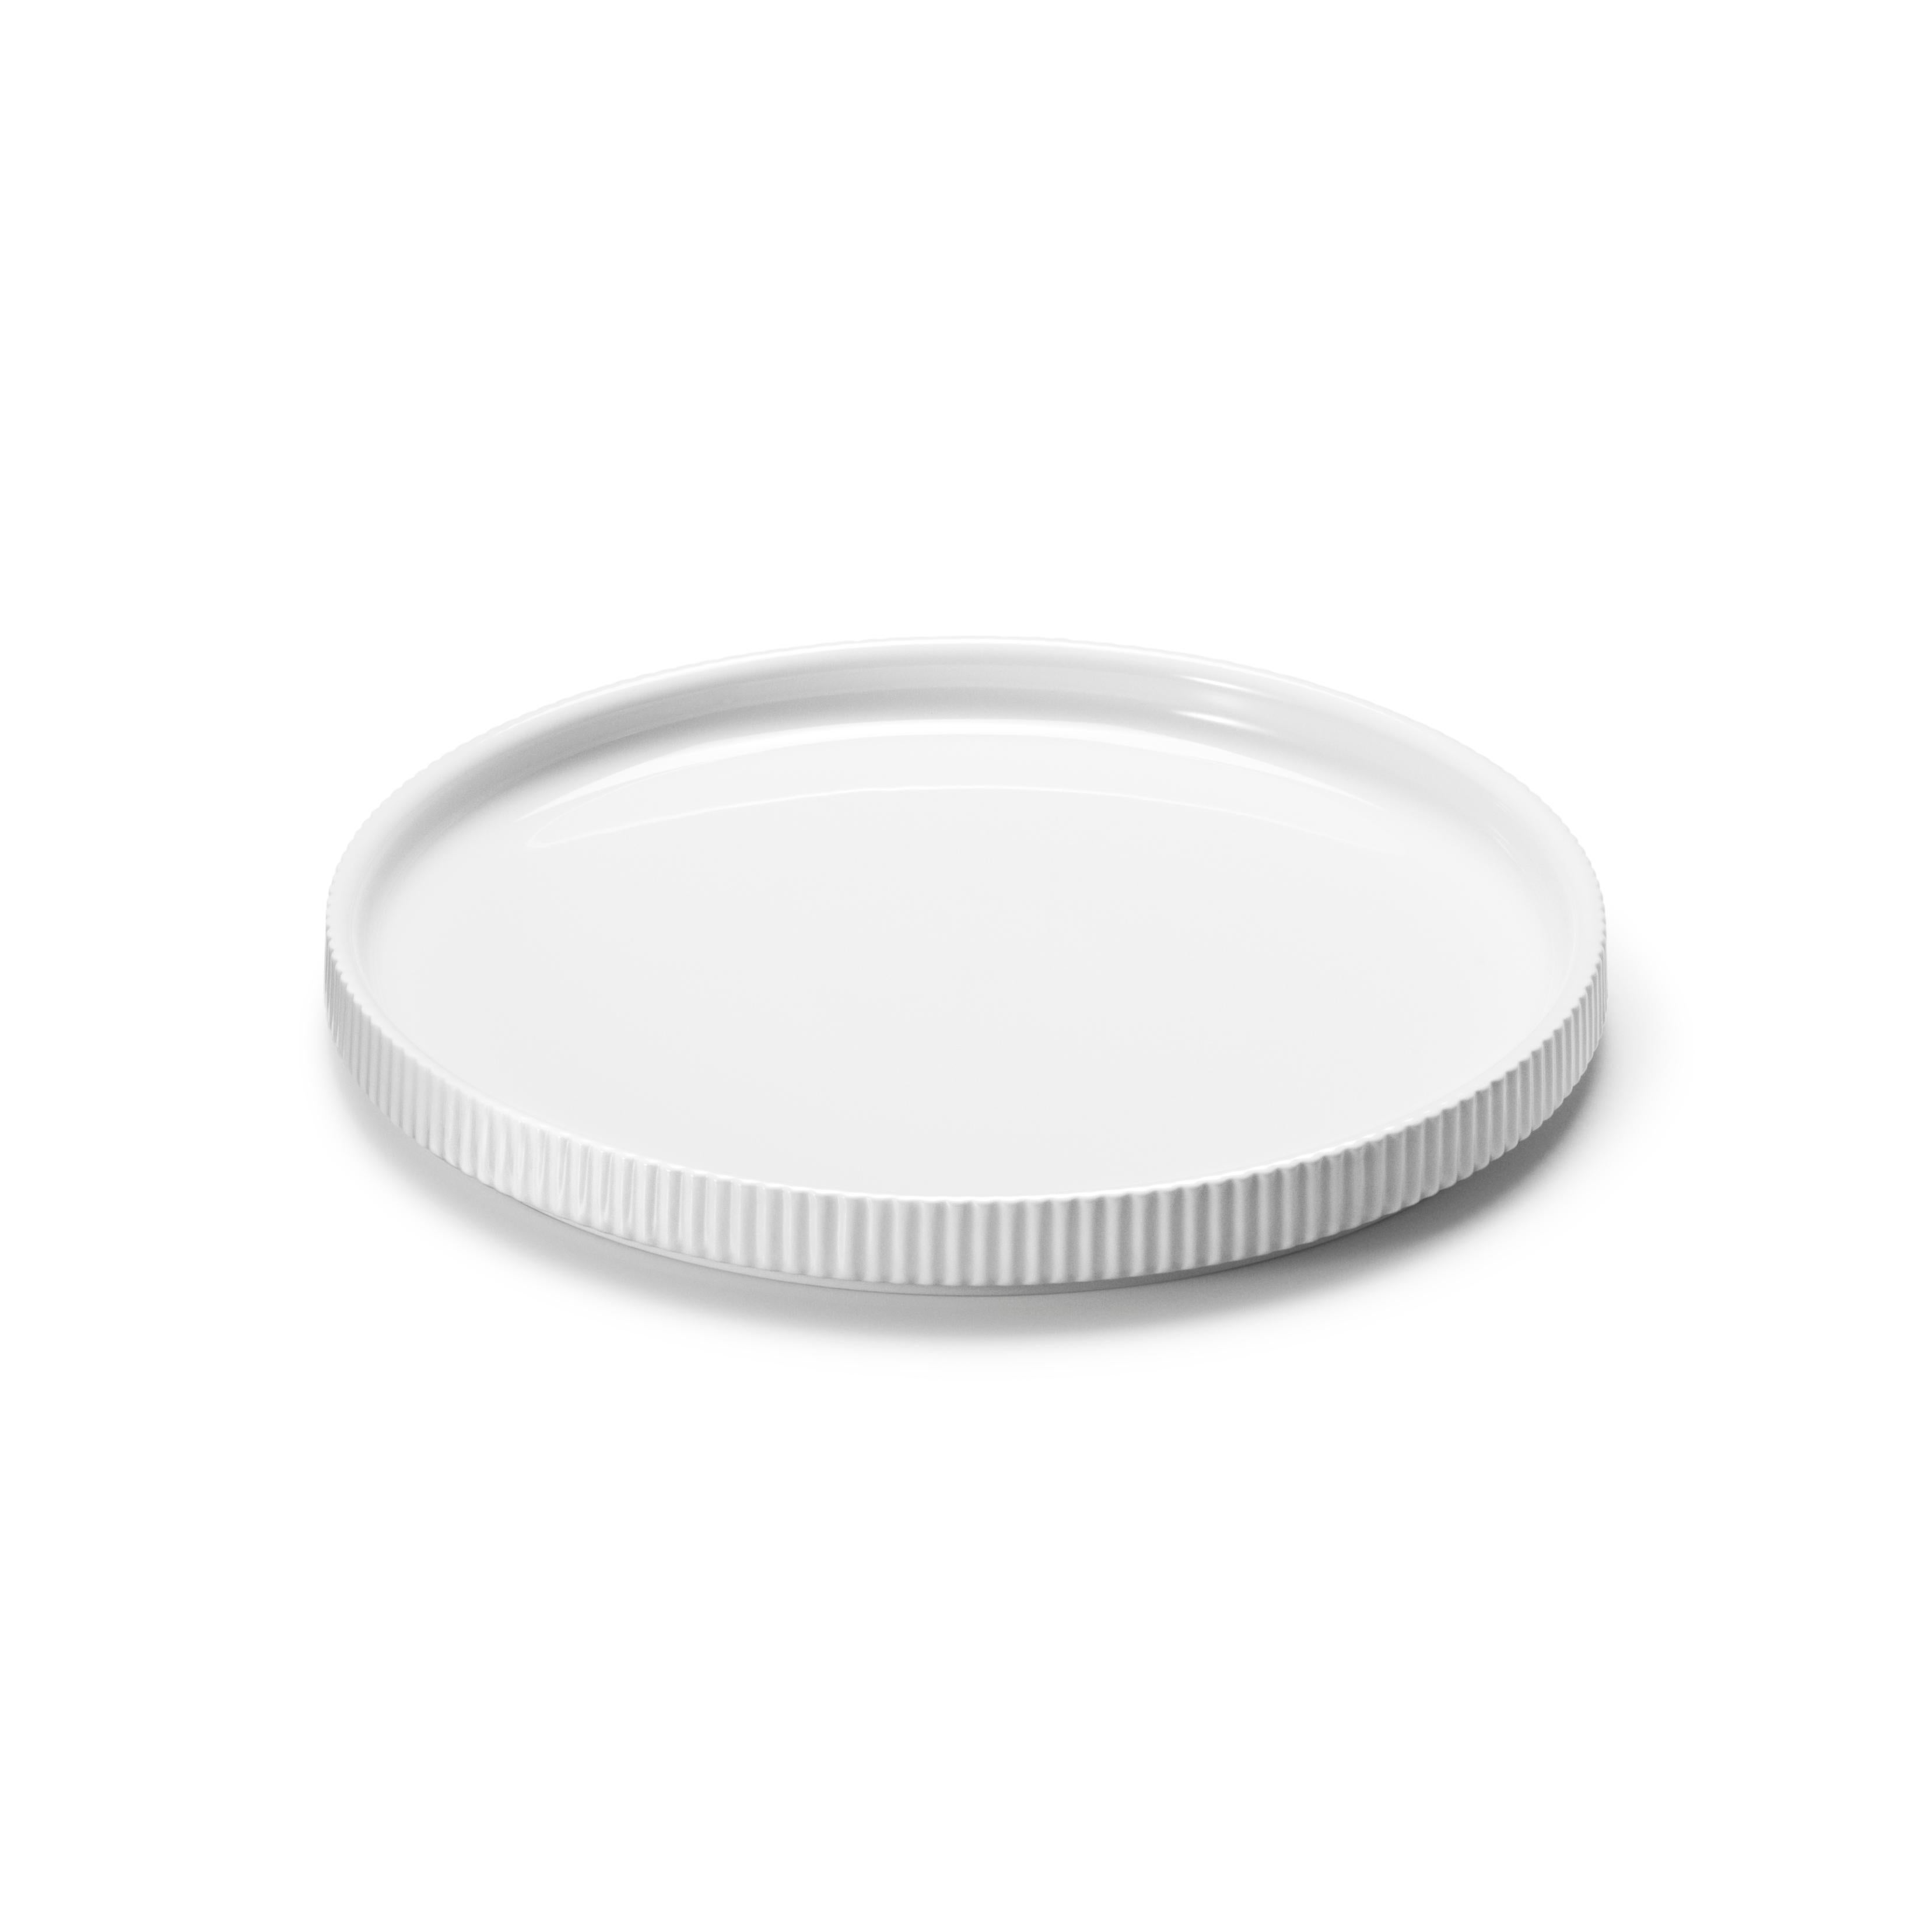 Minimalist yet still with subtle detailing, this small porcelain plate is perfect for lunch and salads. The small ridges add a tactile element that references Bernadotte’s functionalist Art Deco aesthetic whilst the flat shape of the plate is